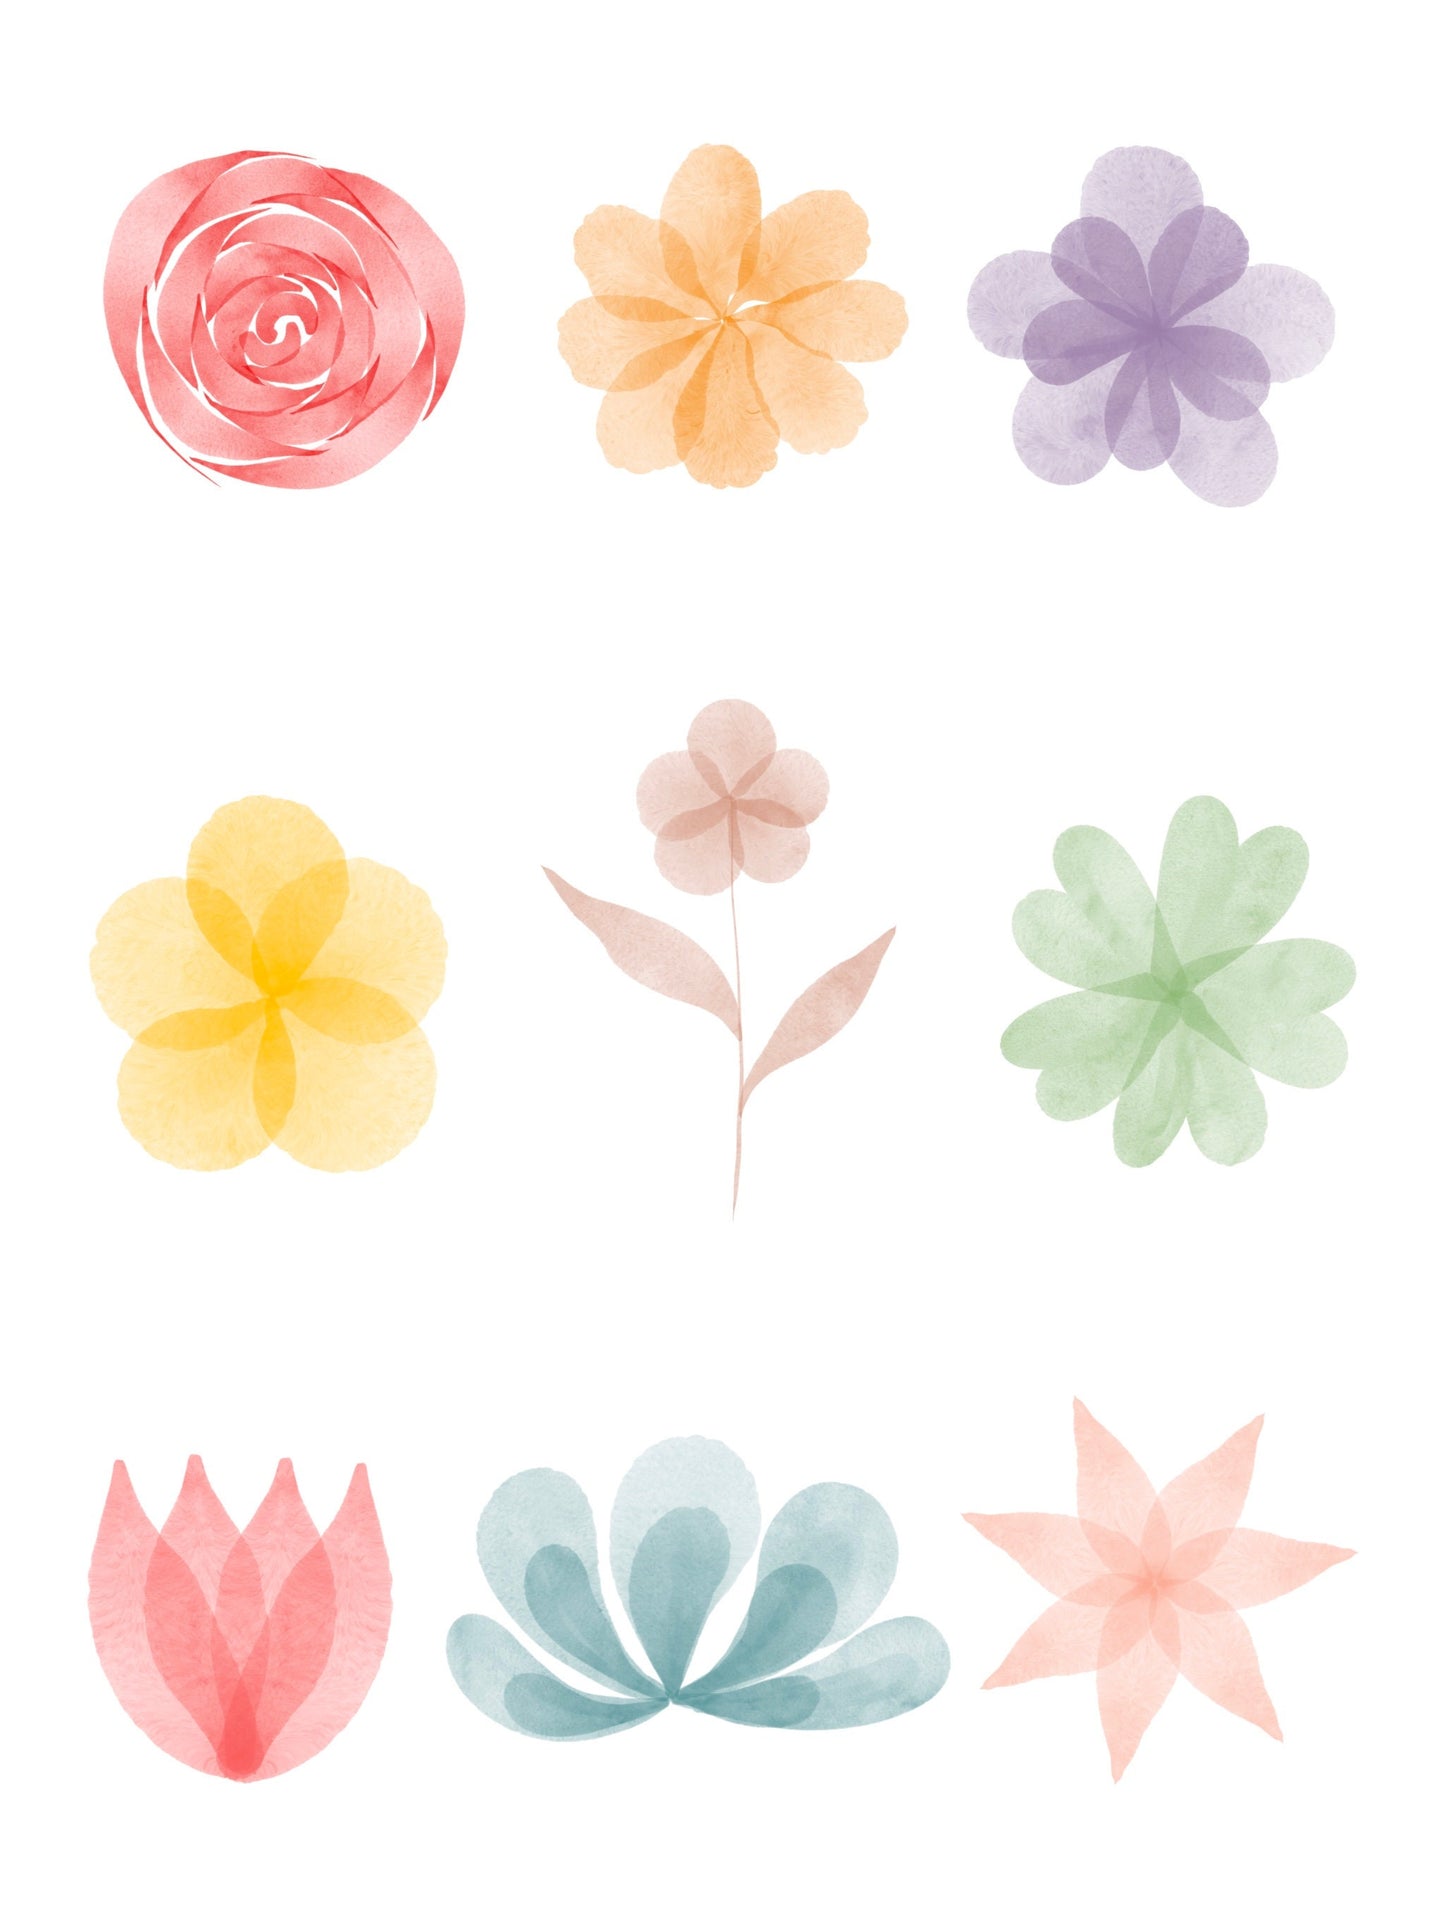 Floral Watercolor Brush Stamps